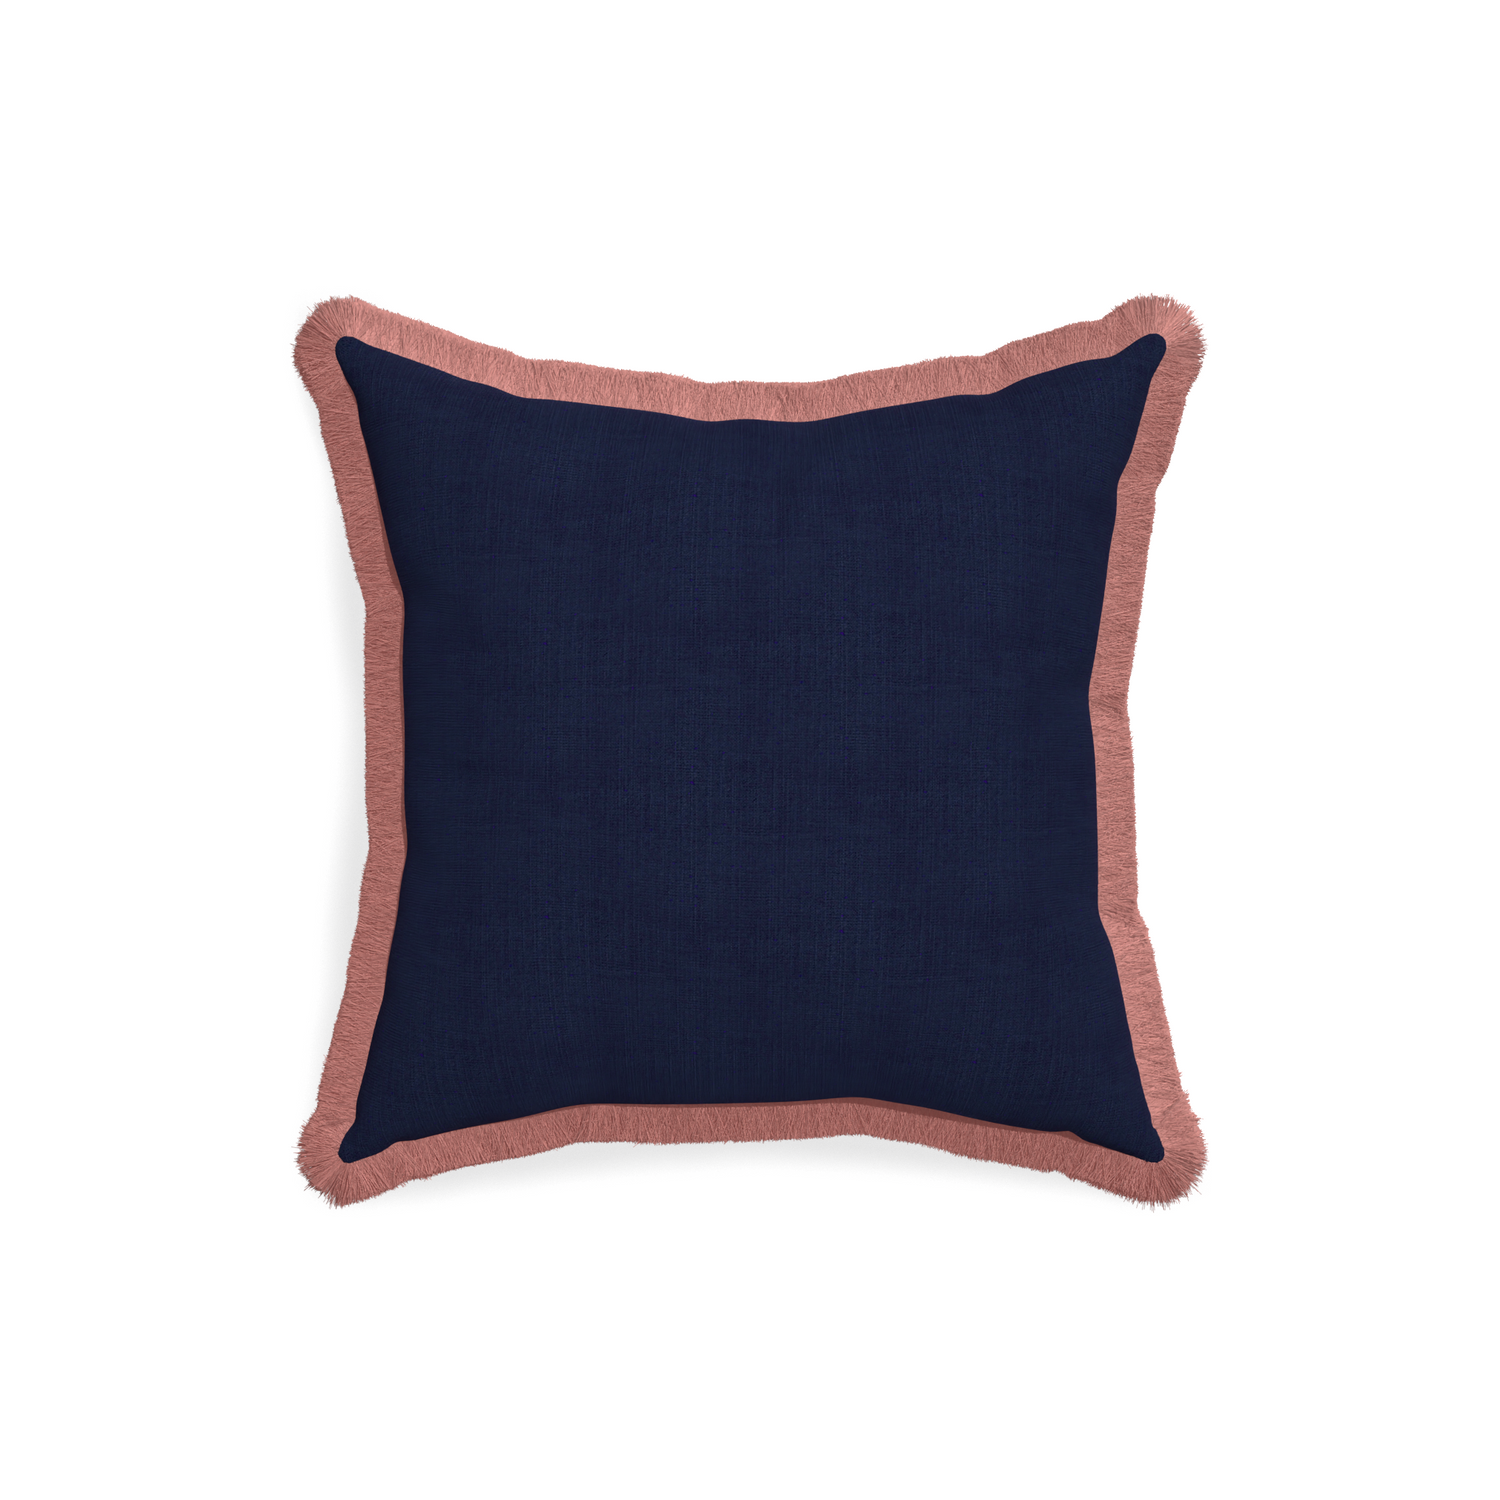 18-square midnight custom navy bluepillow with d fringe on white background